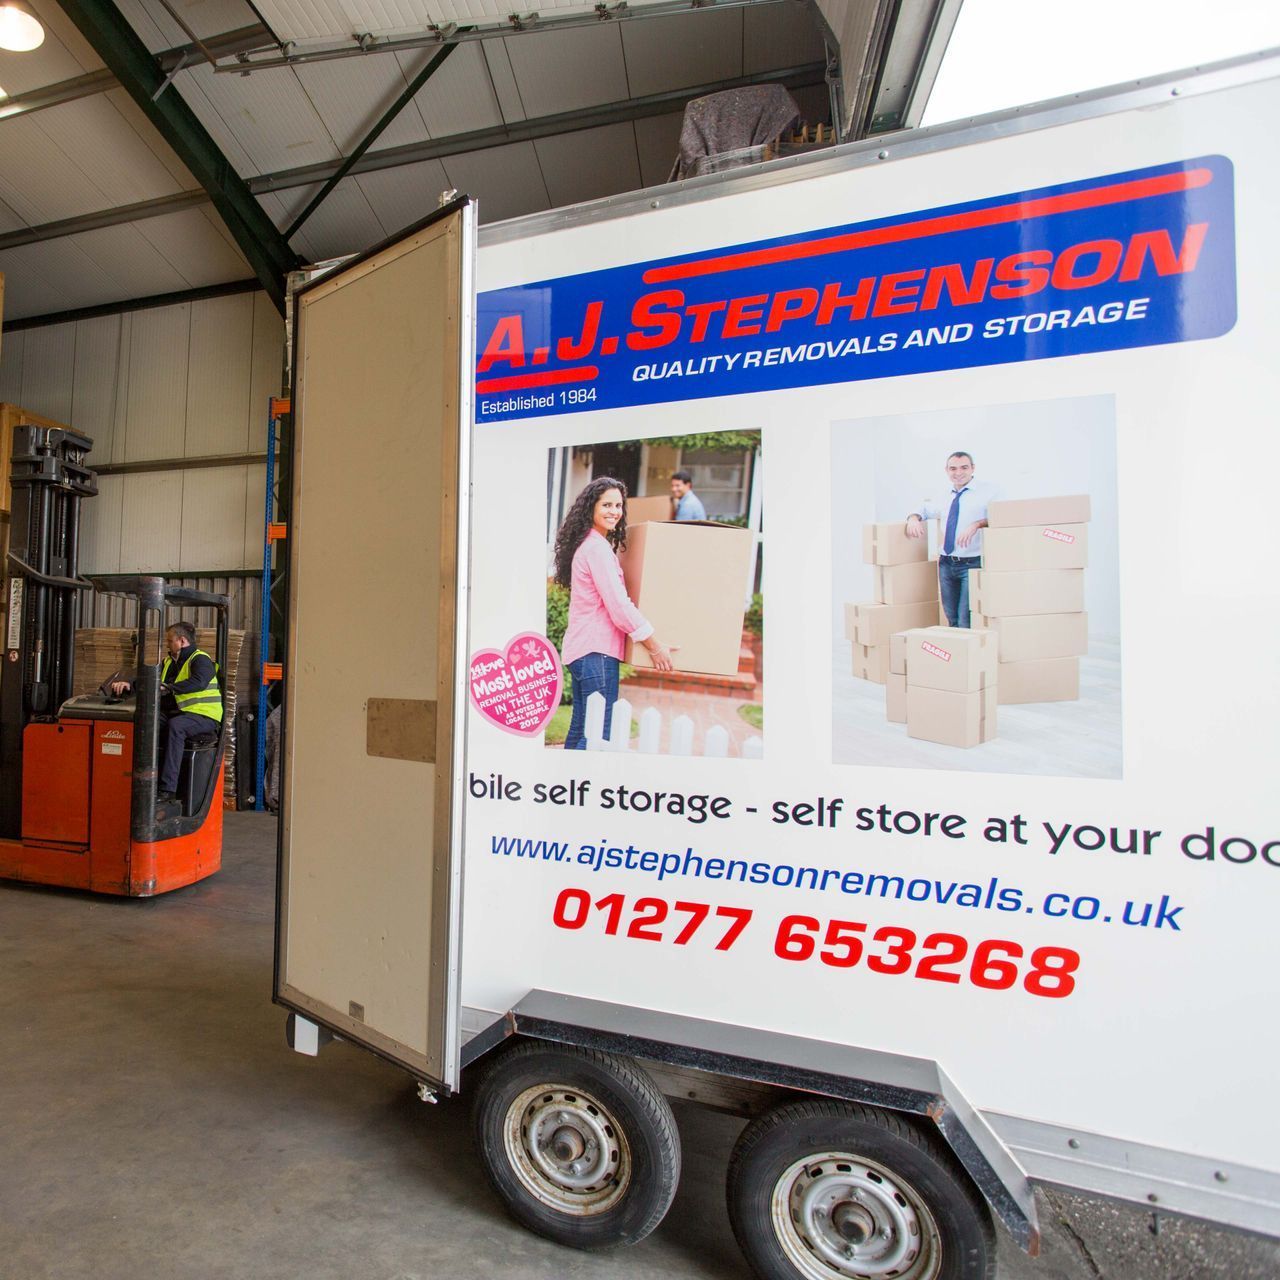 Insured for peace of mind AJ Stephenson Removals & Storage Billericay